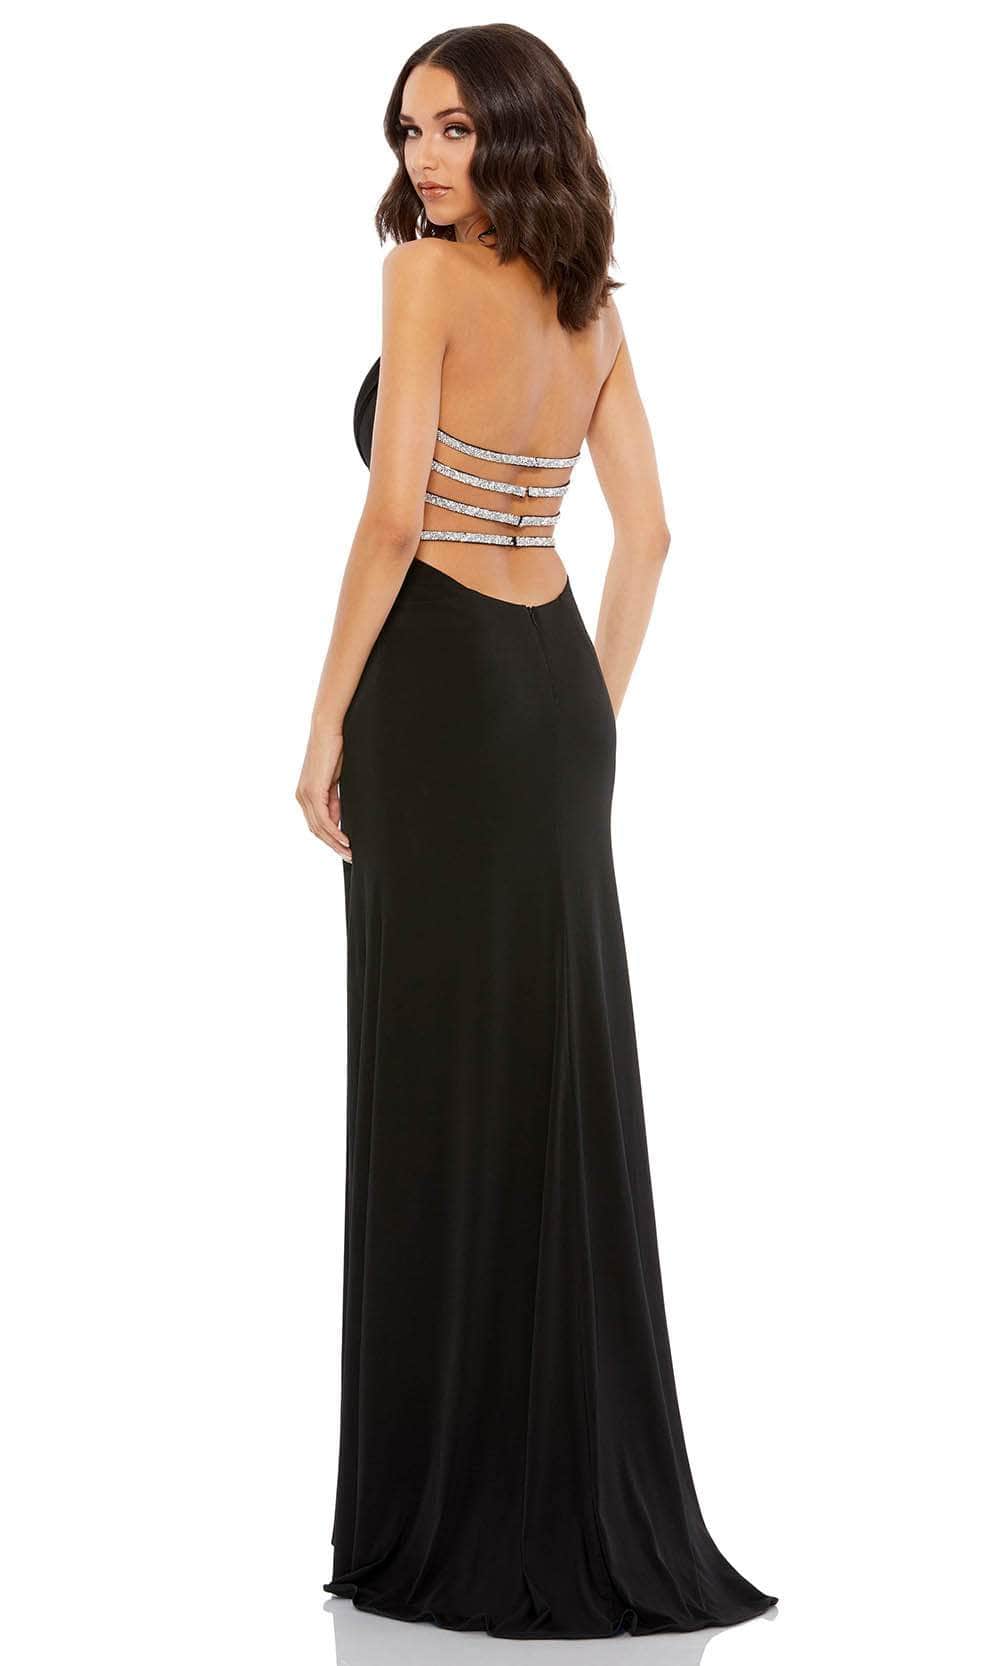 Ieena Duggal 49441 - Strappy Back Evening Gown With Slit Special Occasion Dress